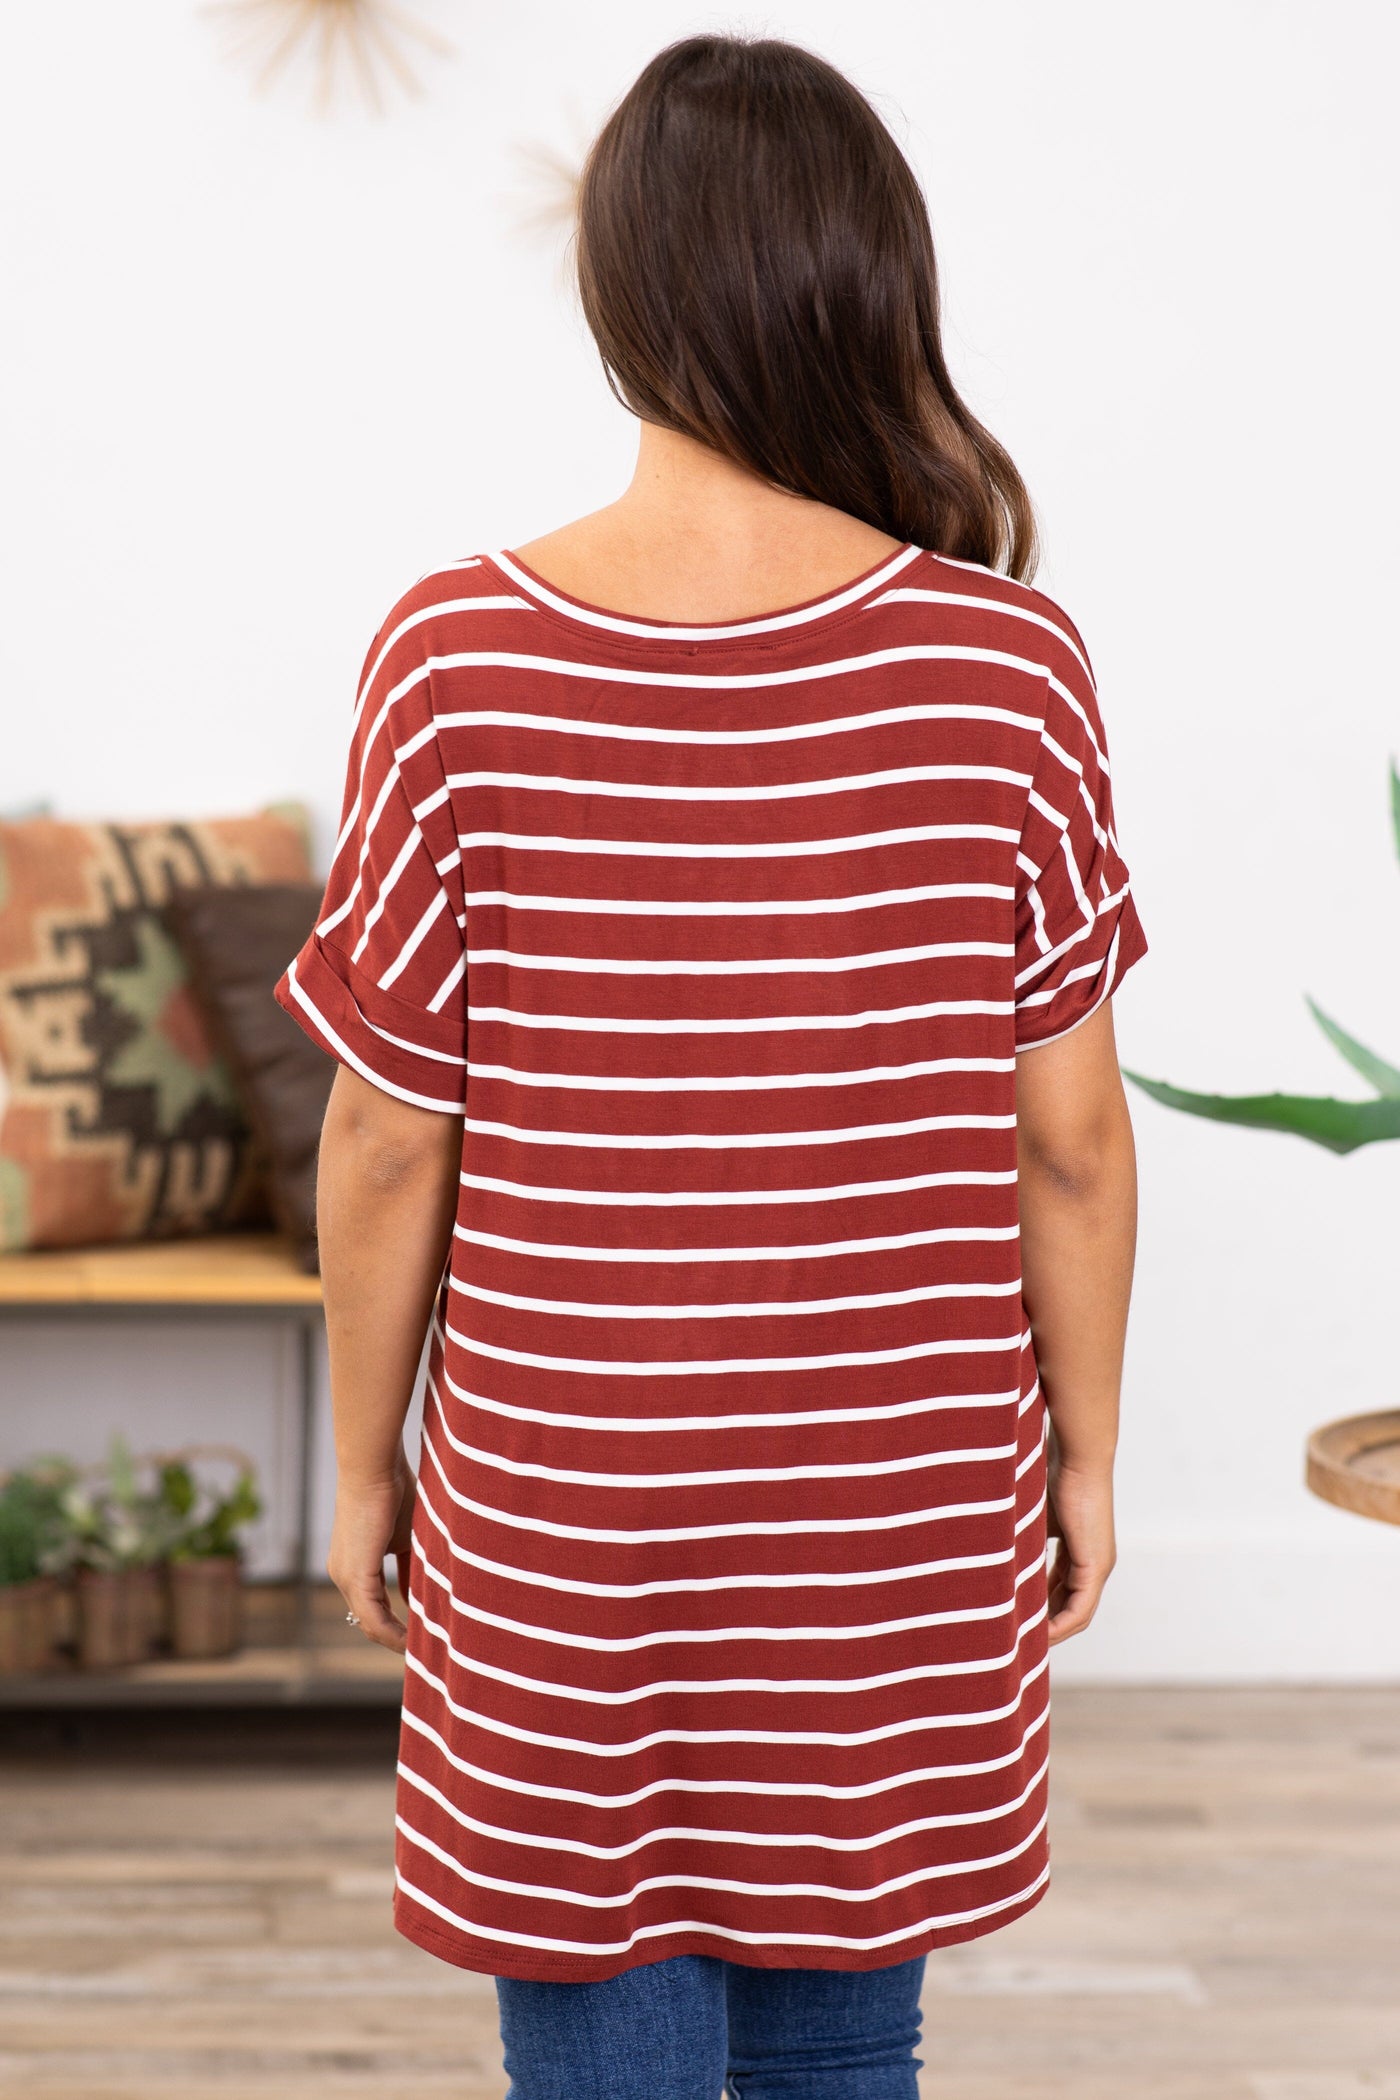 Rust and Off White Stripe V-Neck Top - Filly Flair